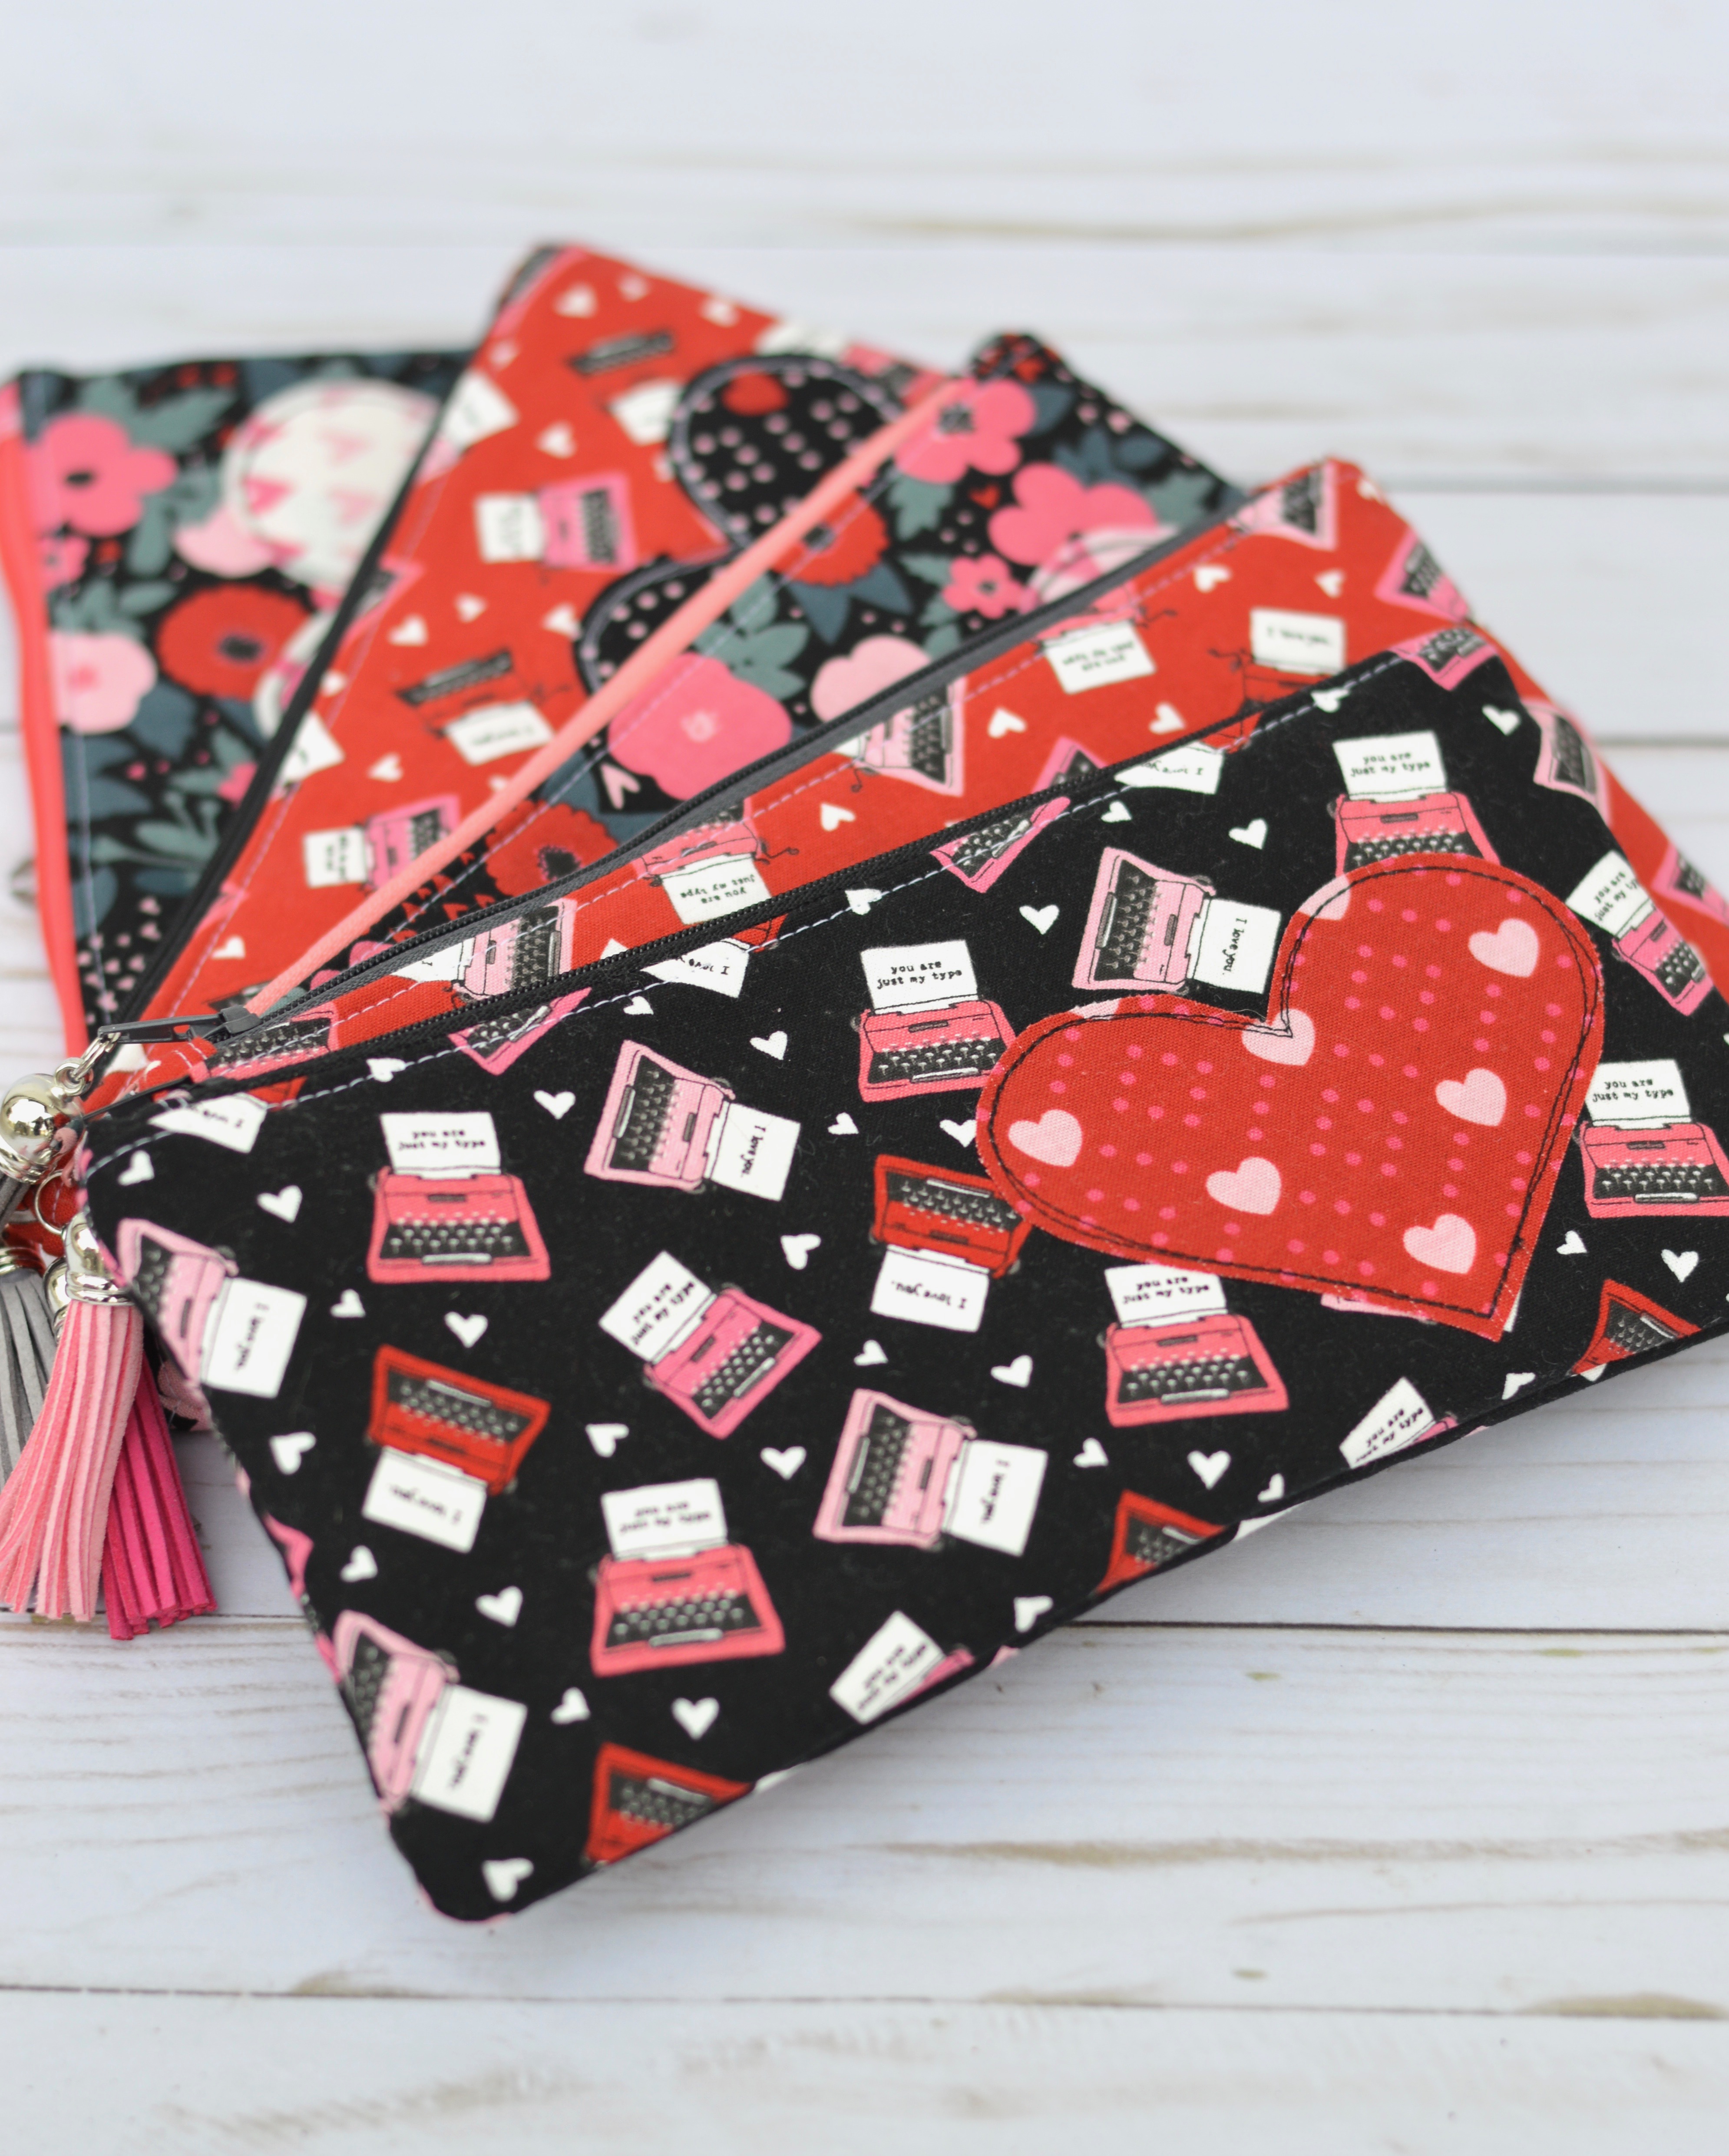 Heart Zipper pouch tutorial for Valentines